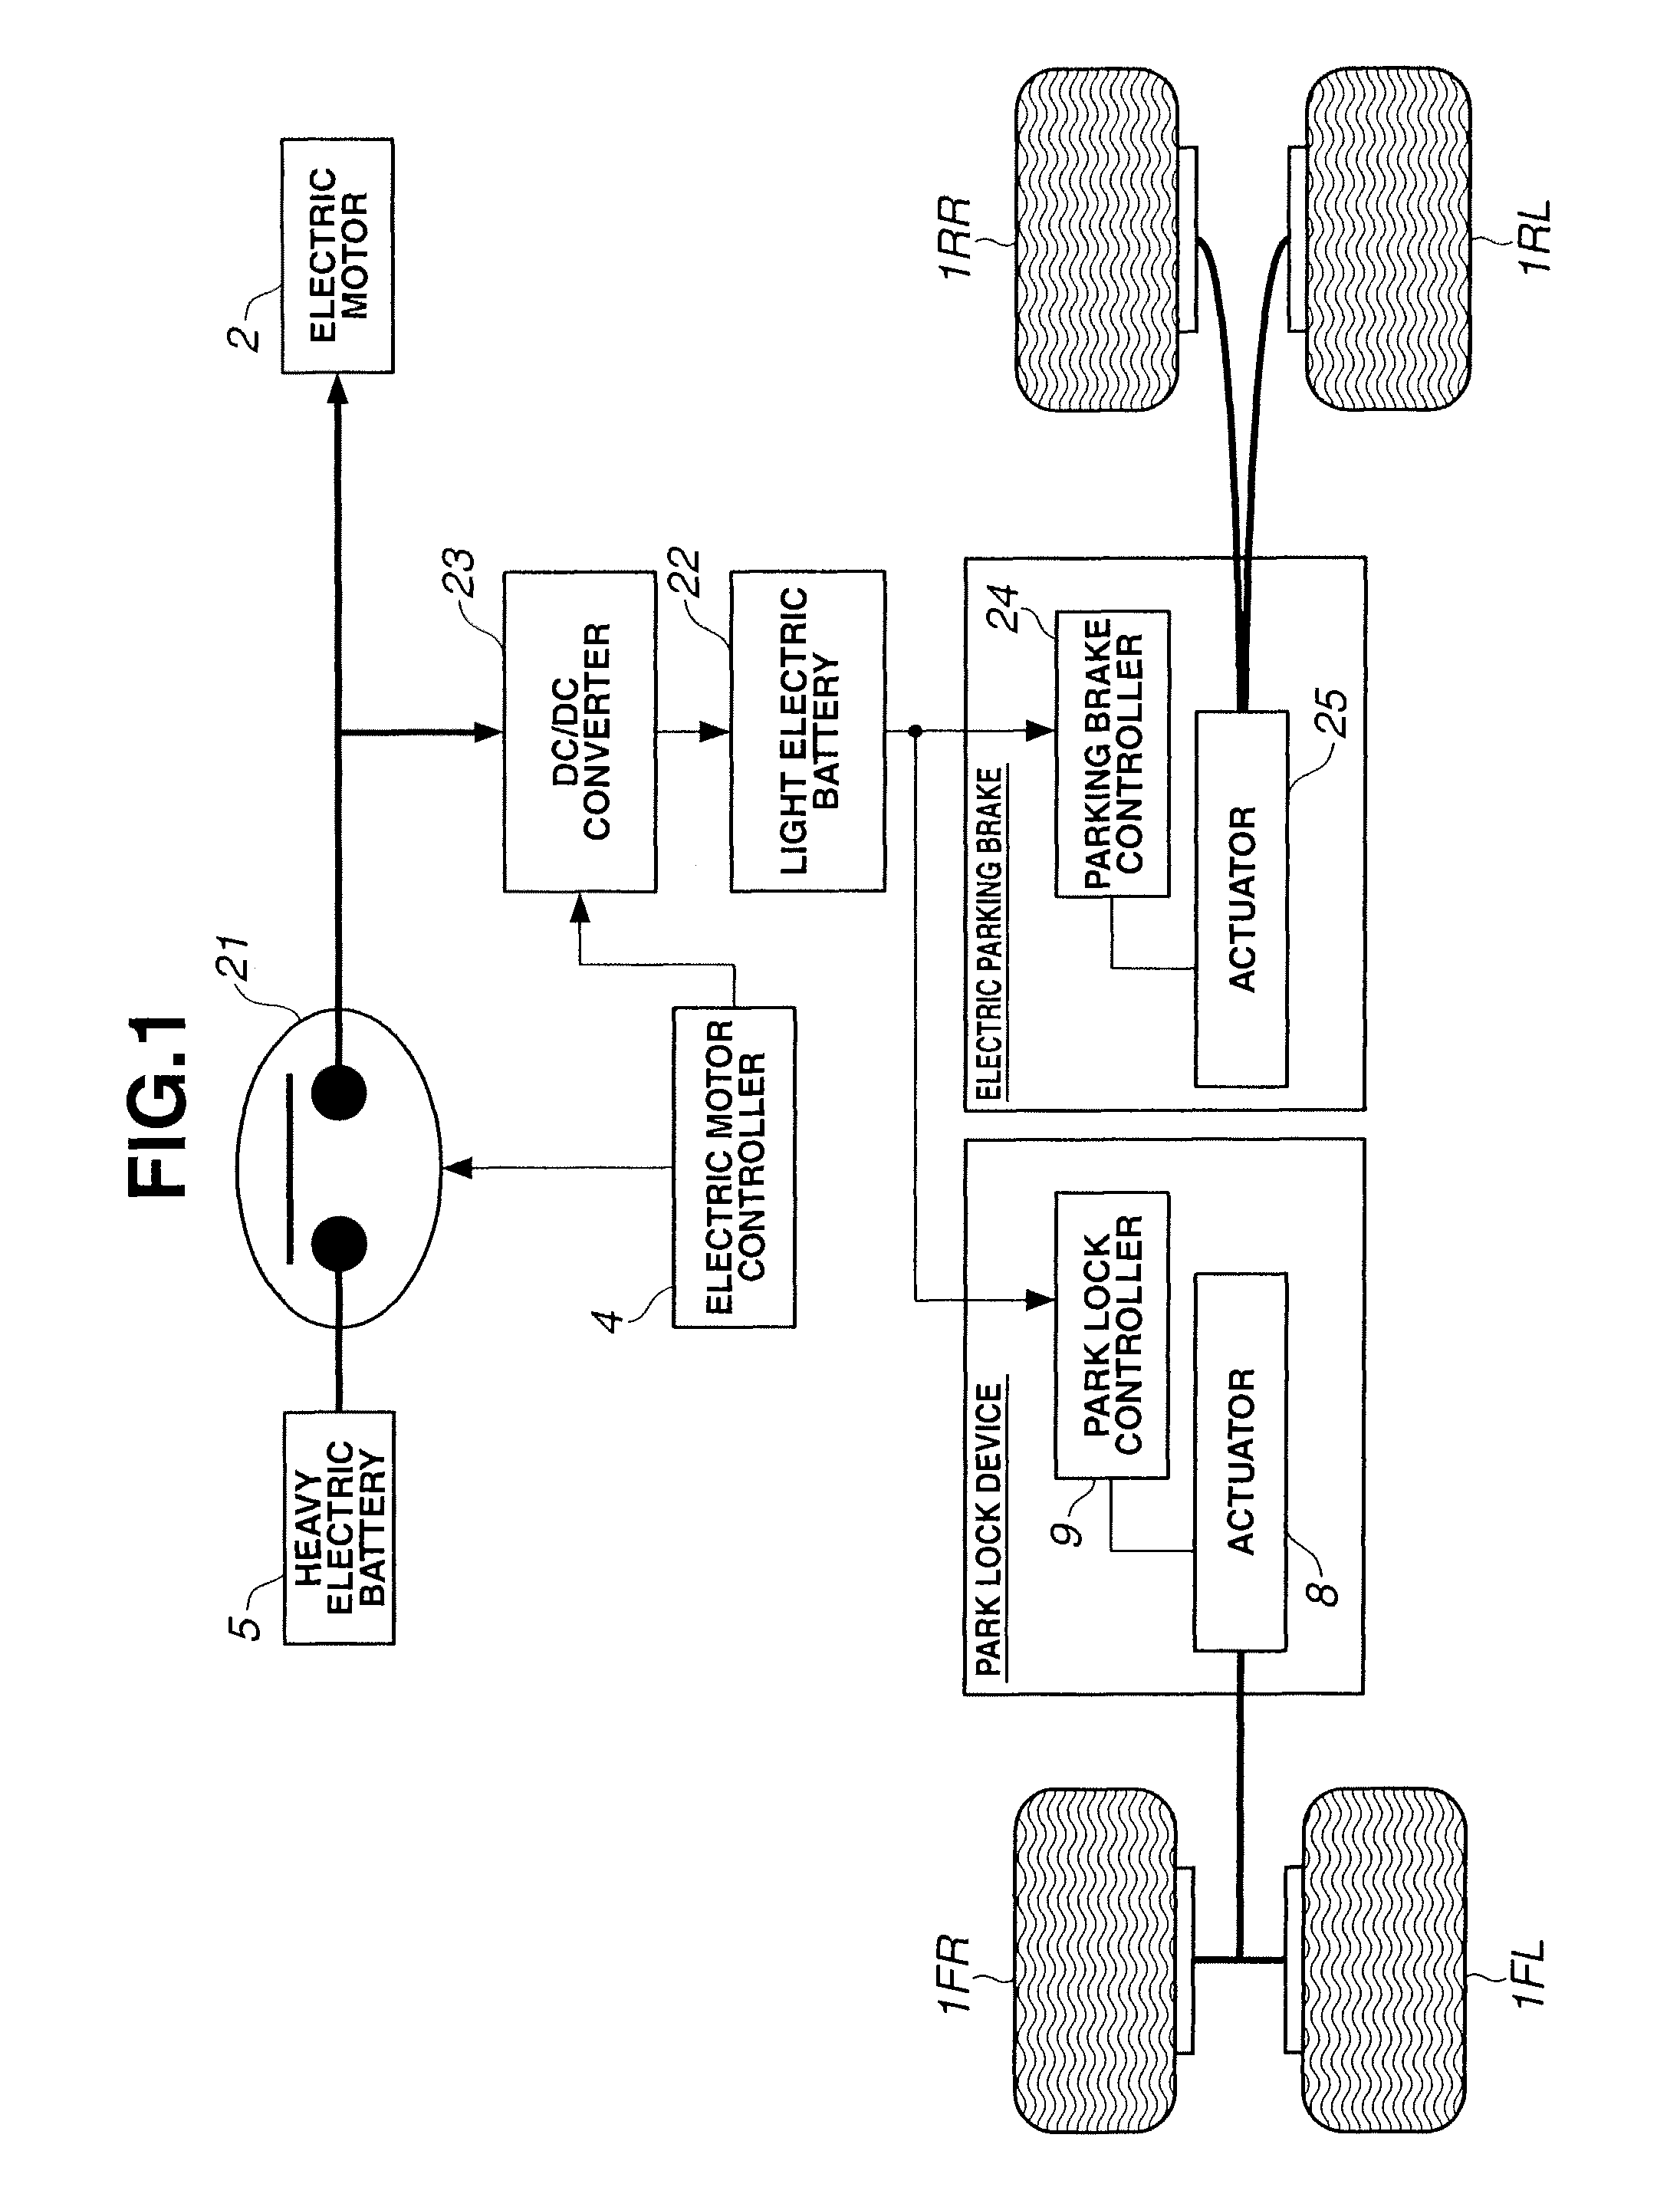 Control device for use in vehicle, adapted to control safety measures against electric power supply failure